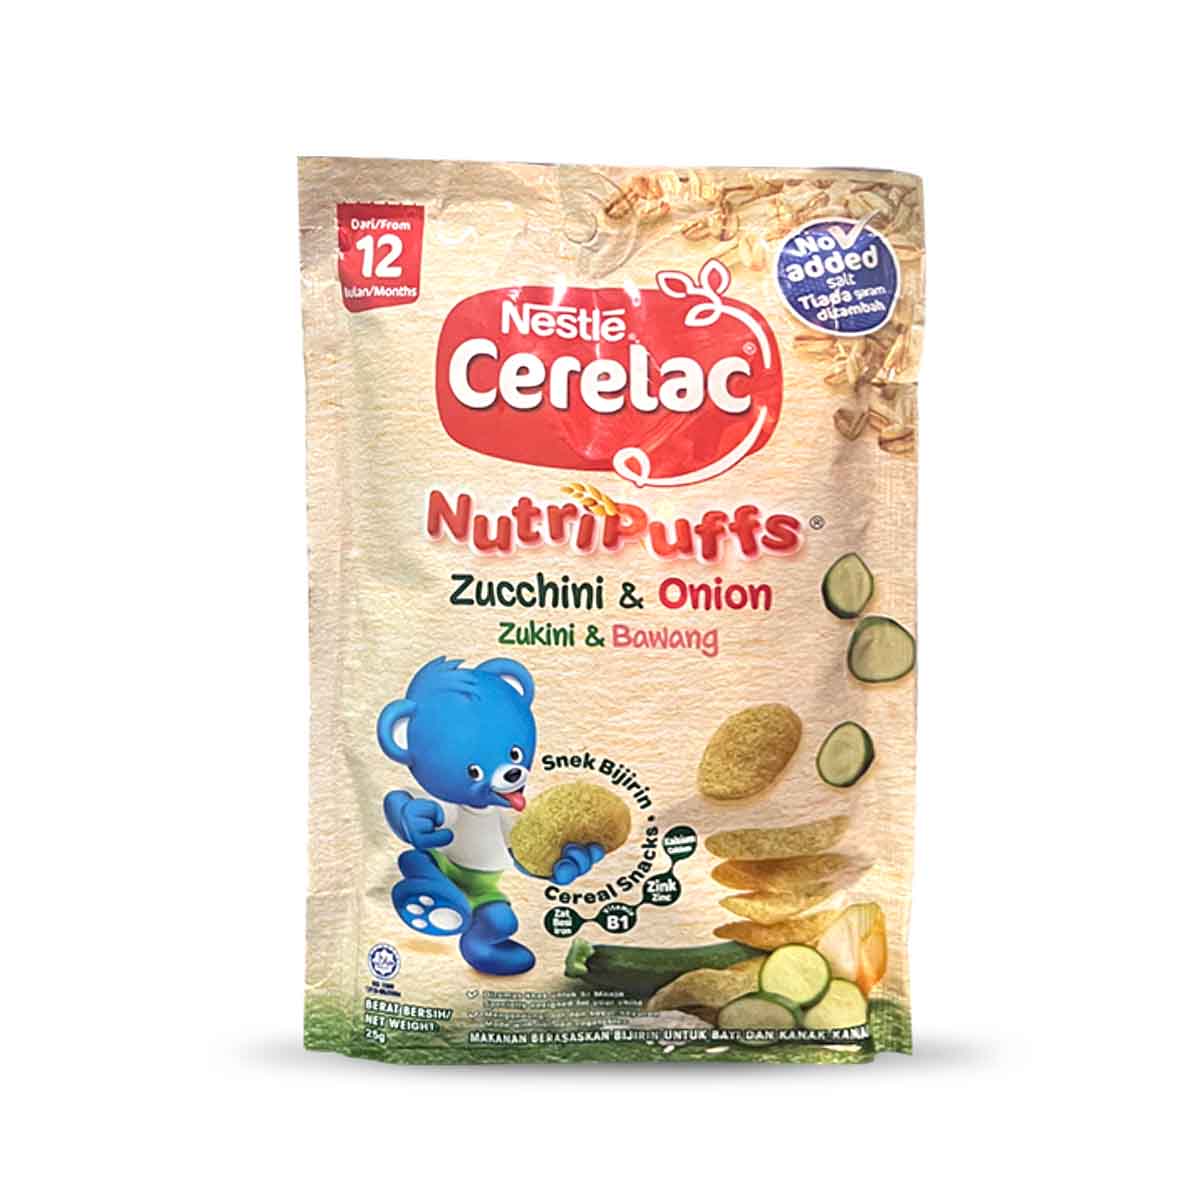 Buy Nestle Cerelac Nutri Puffs Baby Snack with Zucchini & Onion - 25gms Online in India at uyyaala.com